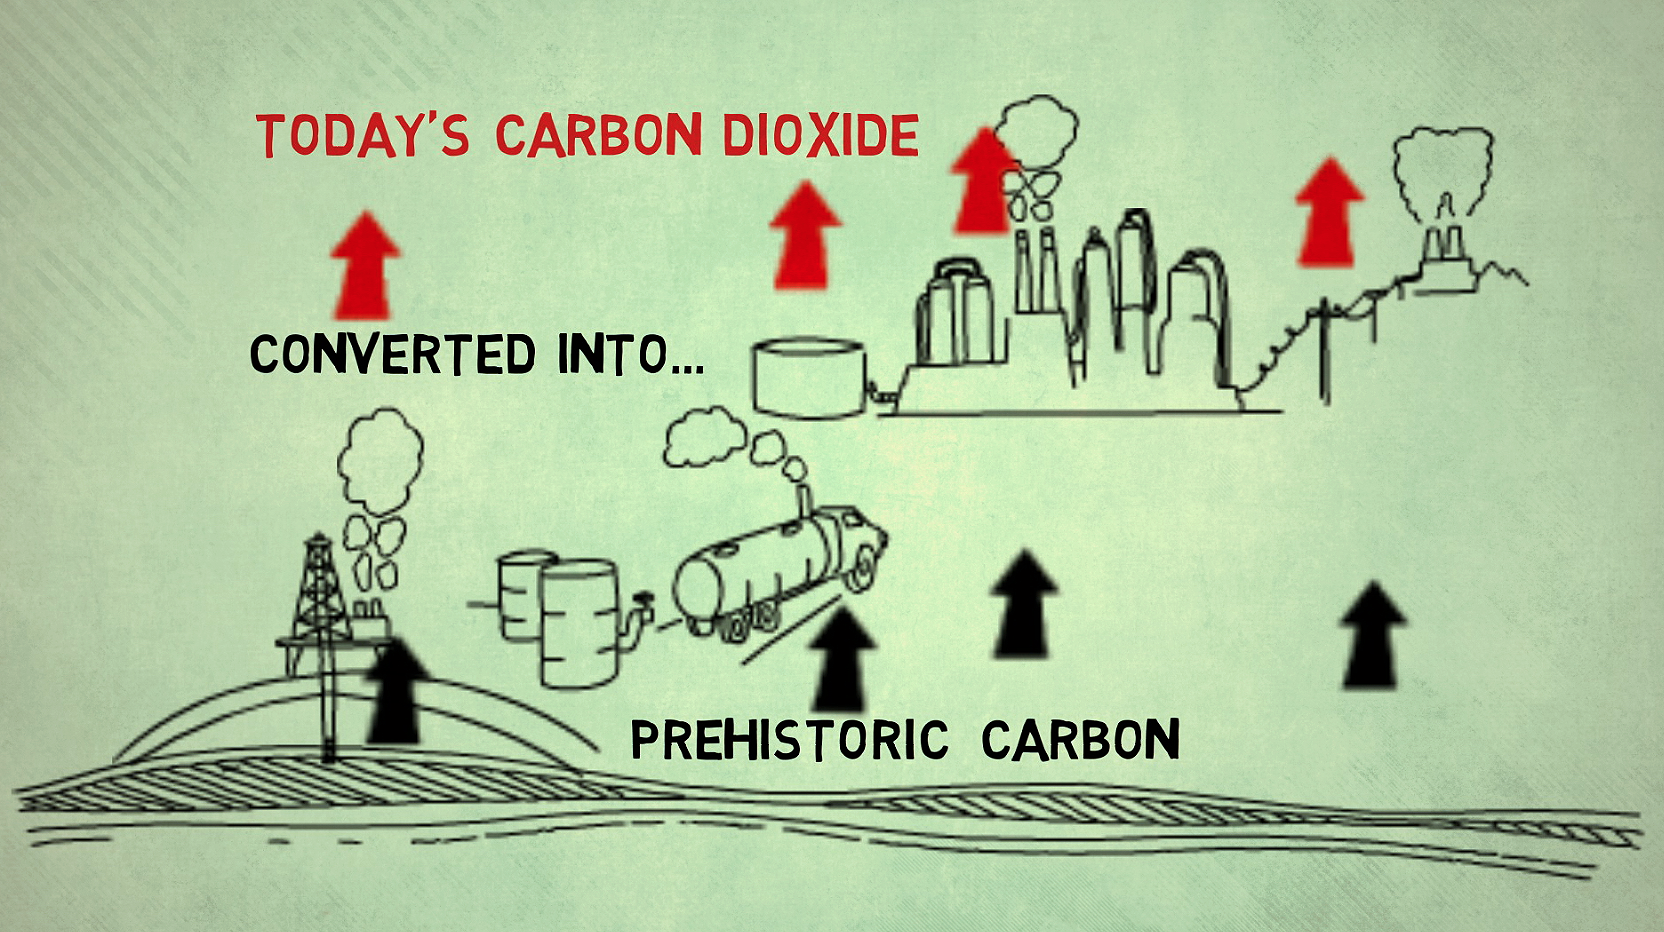 Fossil fuels carbon cycle